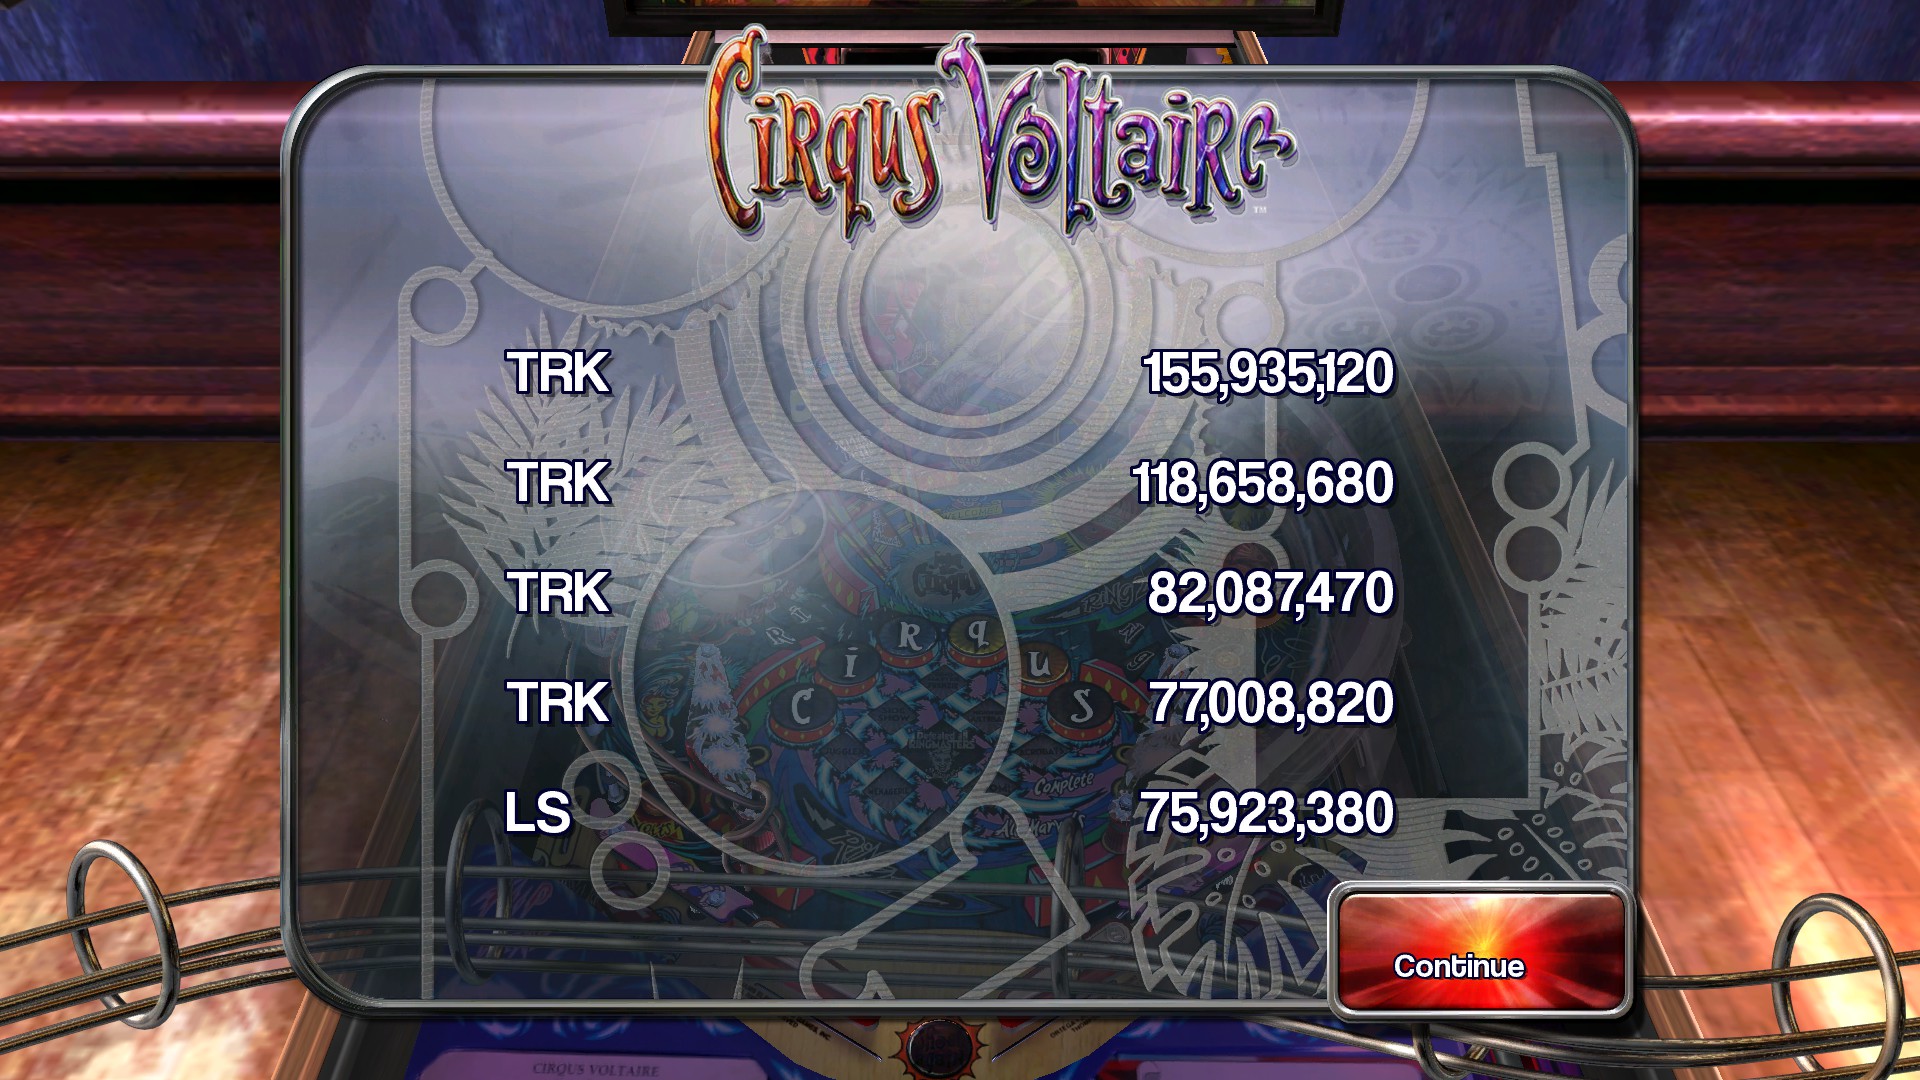 TheTrickster: Pinball Arcade: Circus Voltaire (PC) 155,935,120 points on 2015-11-27 19:35:36